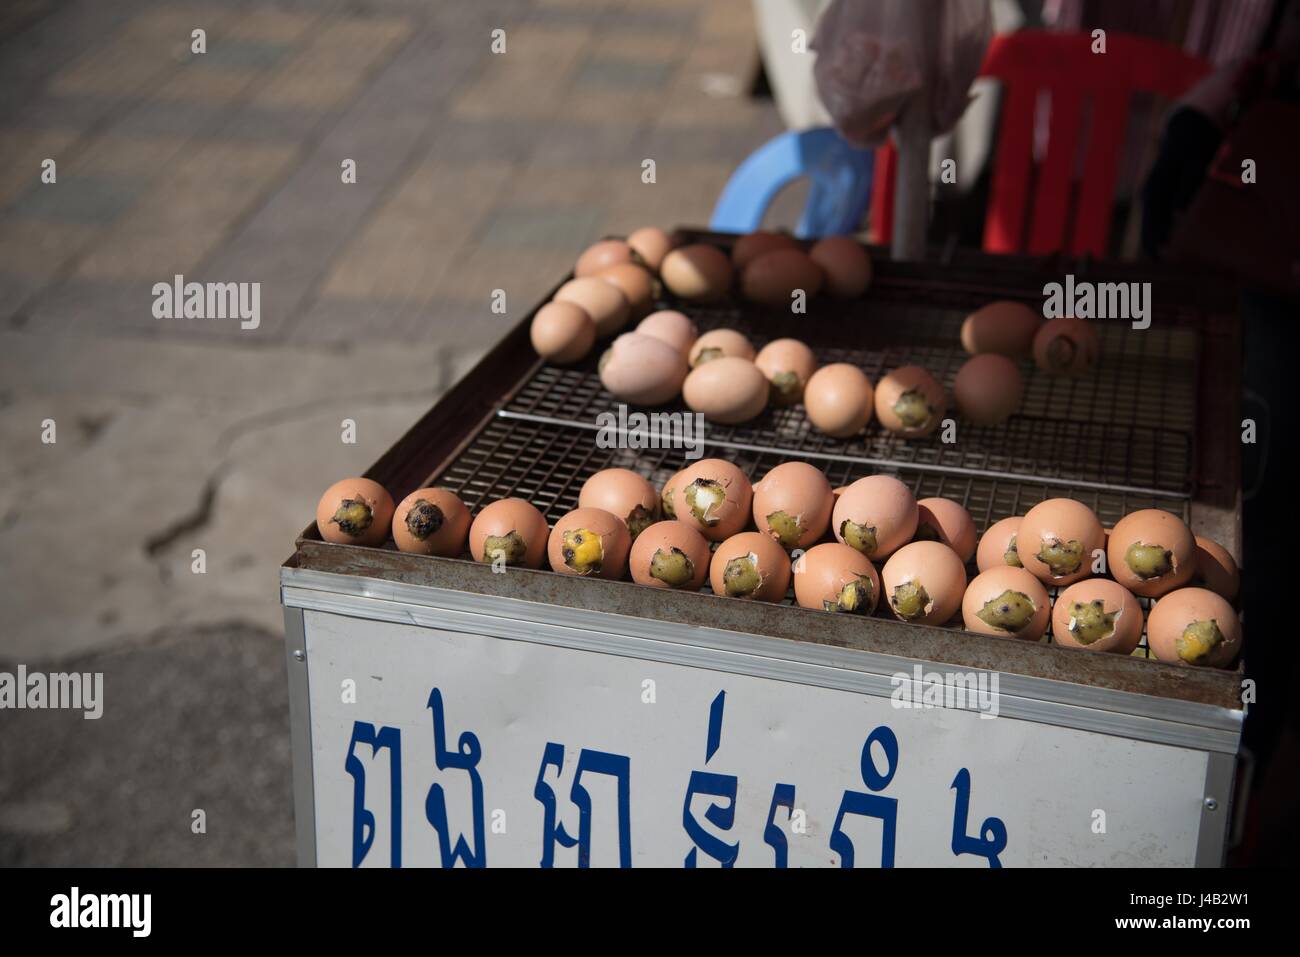 The traditional street-food of balut (boiled bird embryo's in their shell!) being sold roadside, Phnom Penh, Cambodia Stock Photo